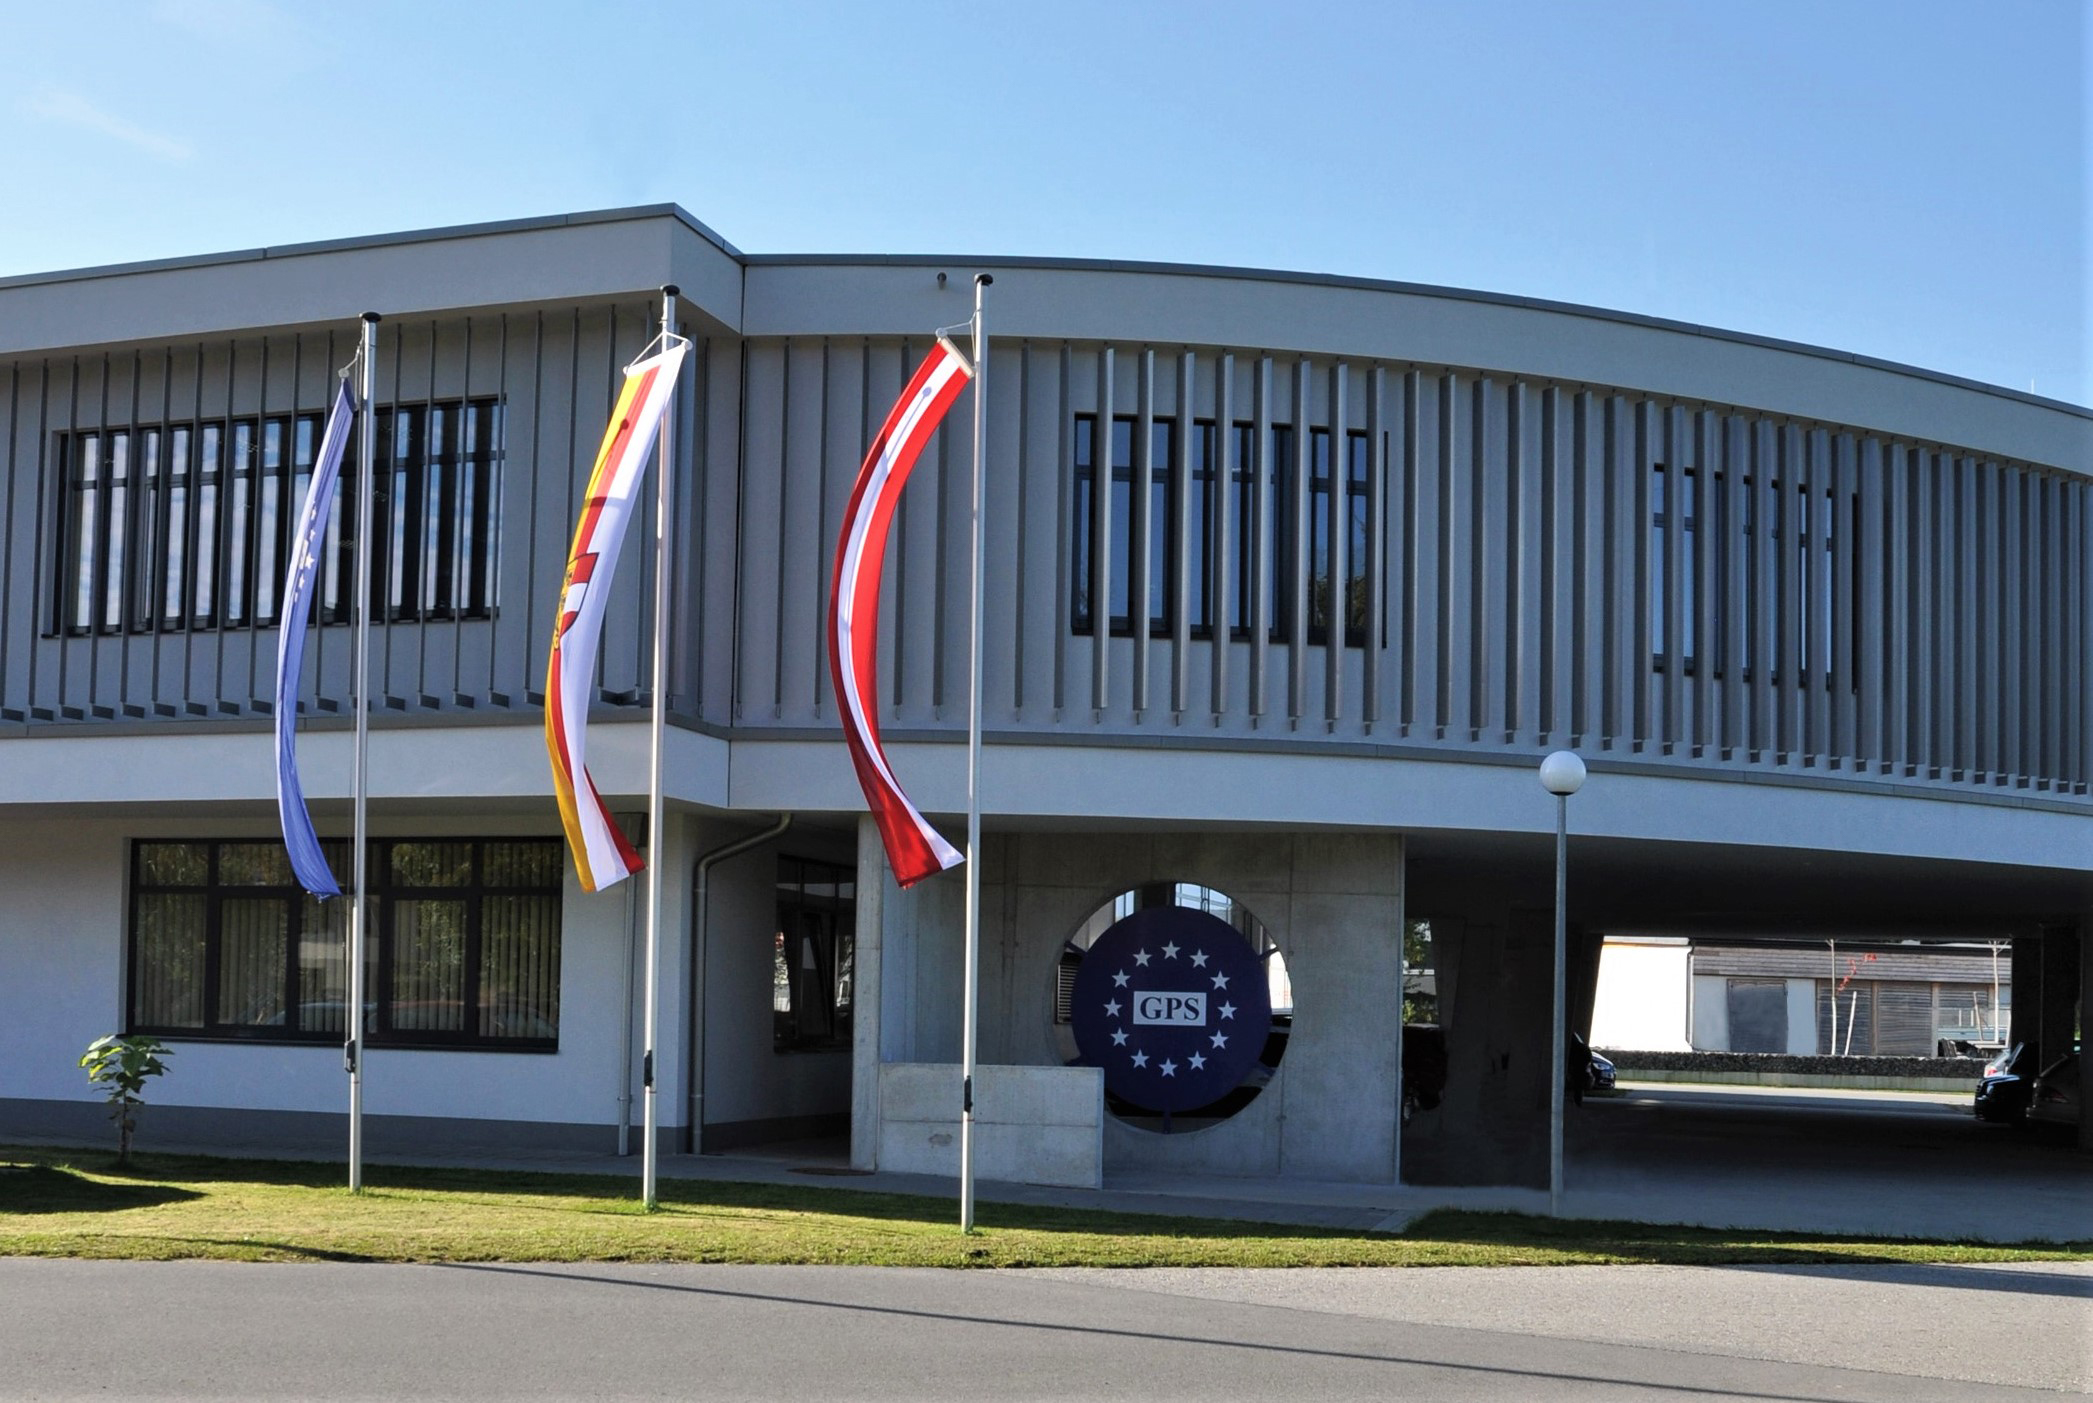 View on the entrance and the flags of GPS Ausbildungszentrums